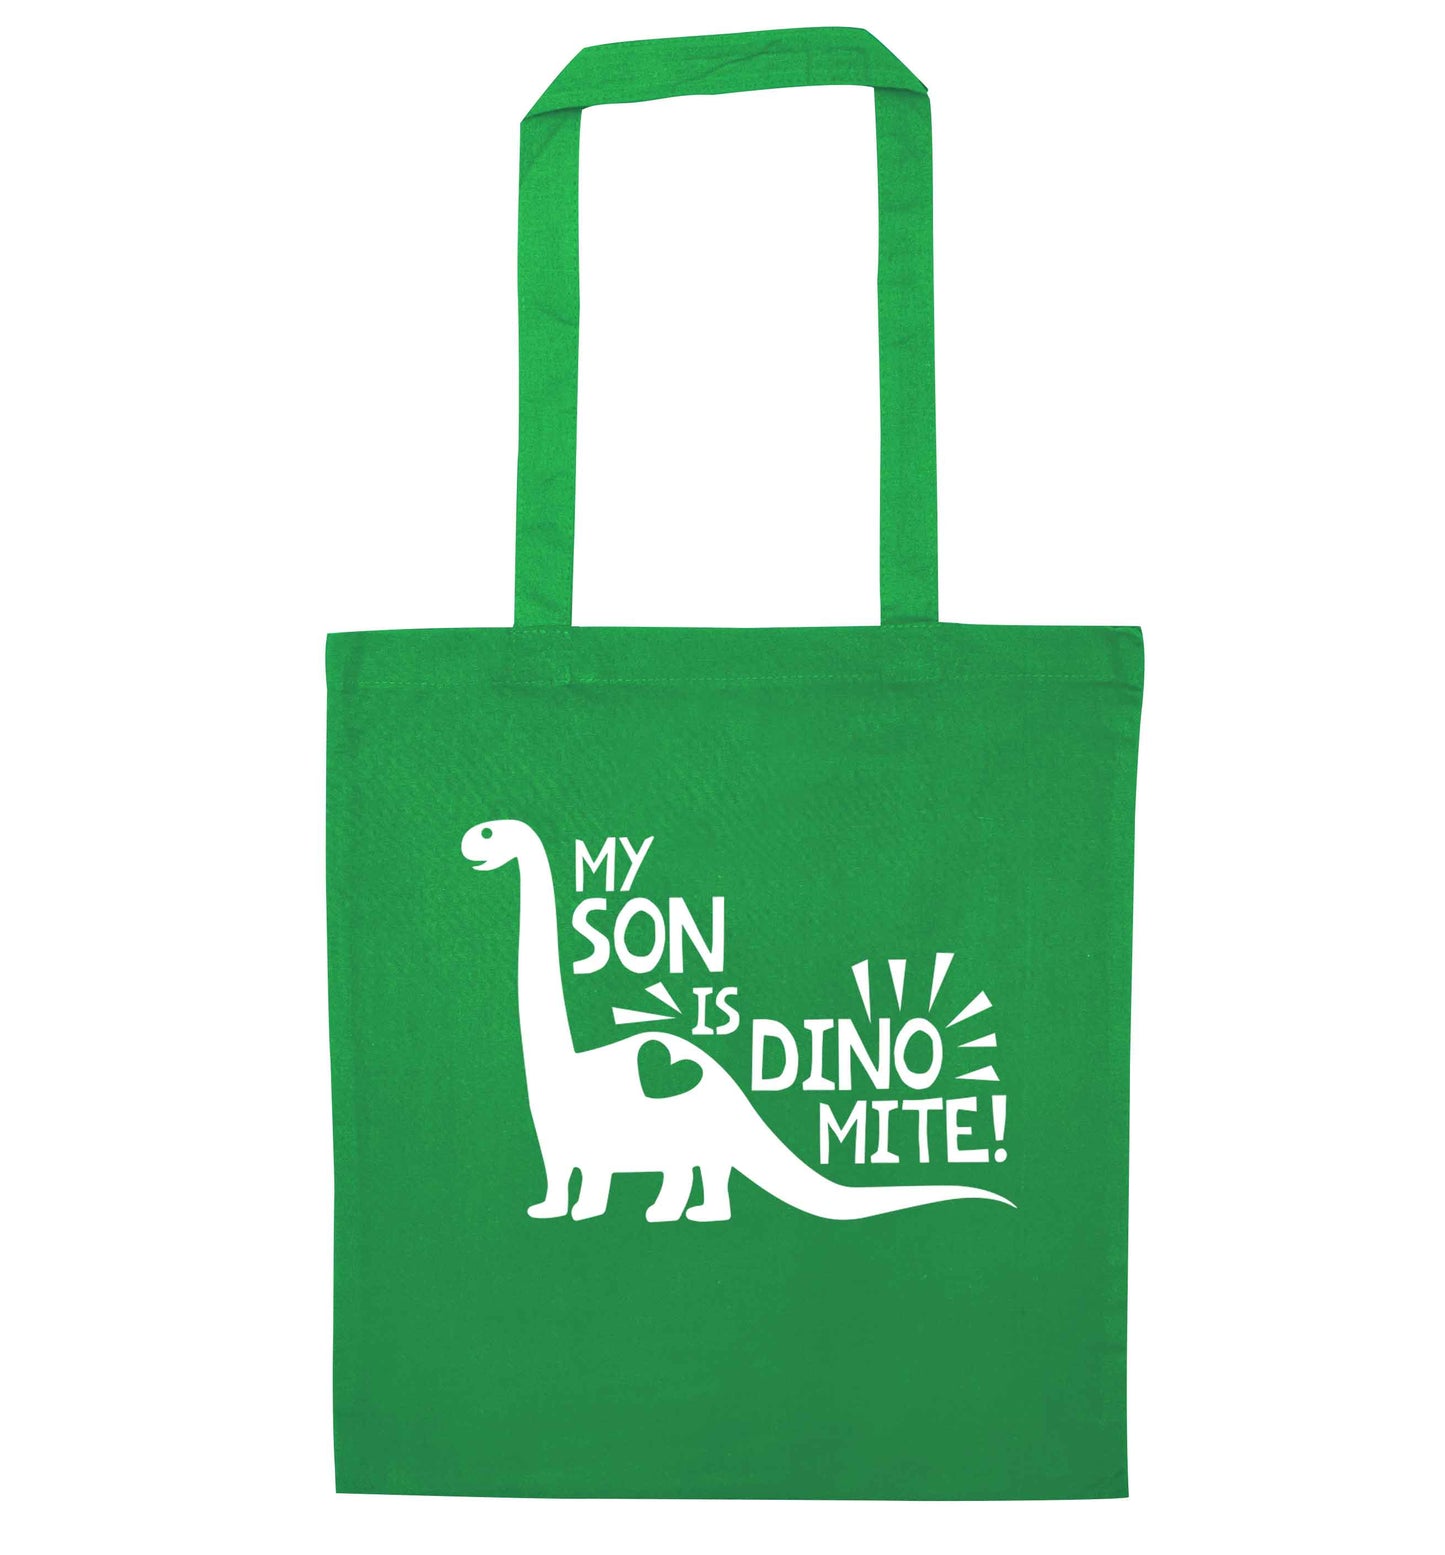 My son is dinomite! green tote bag